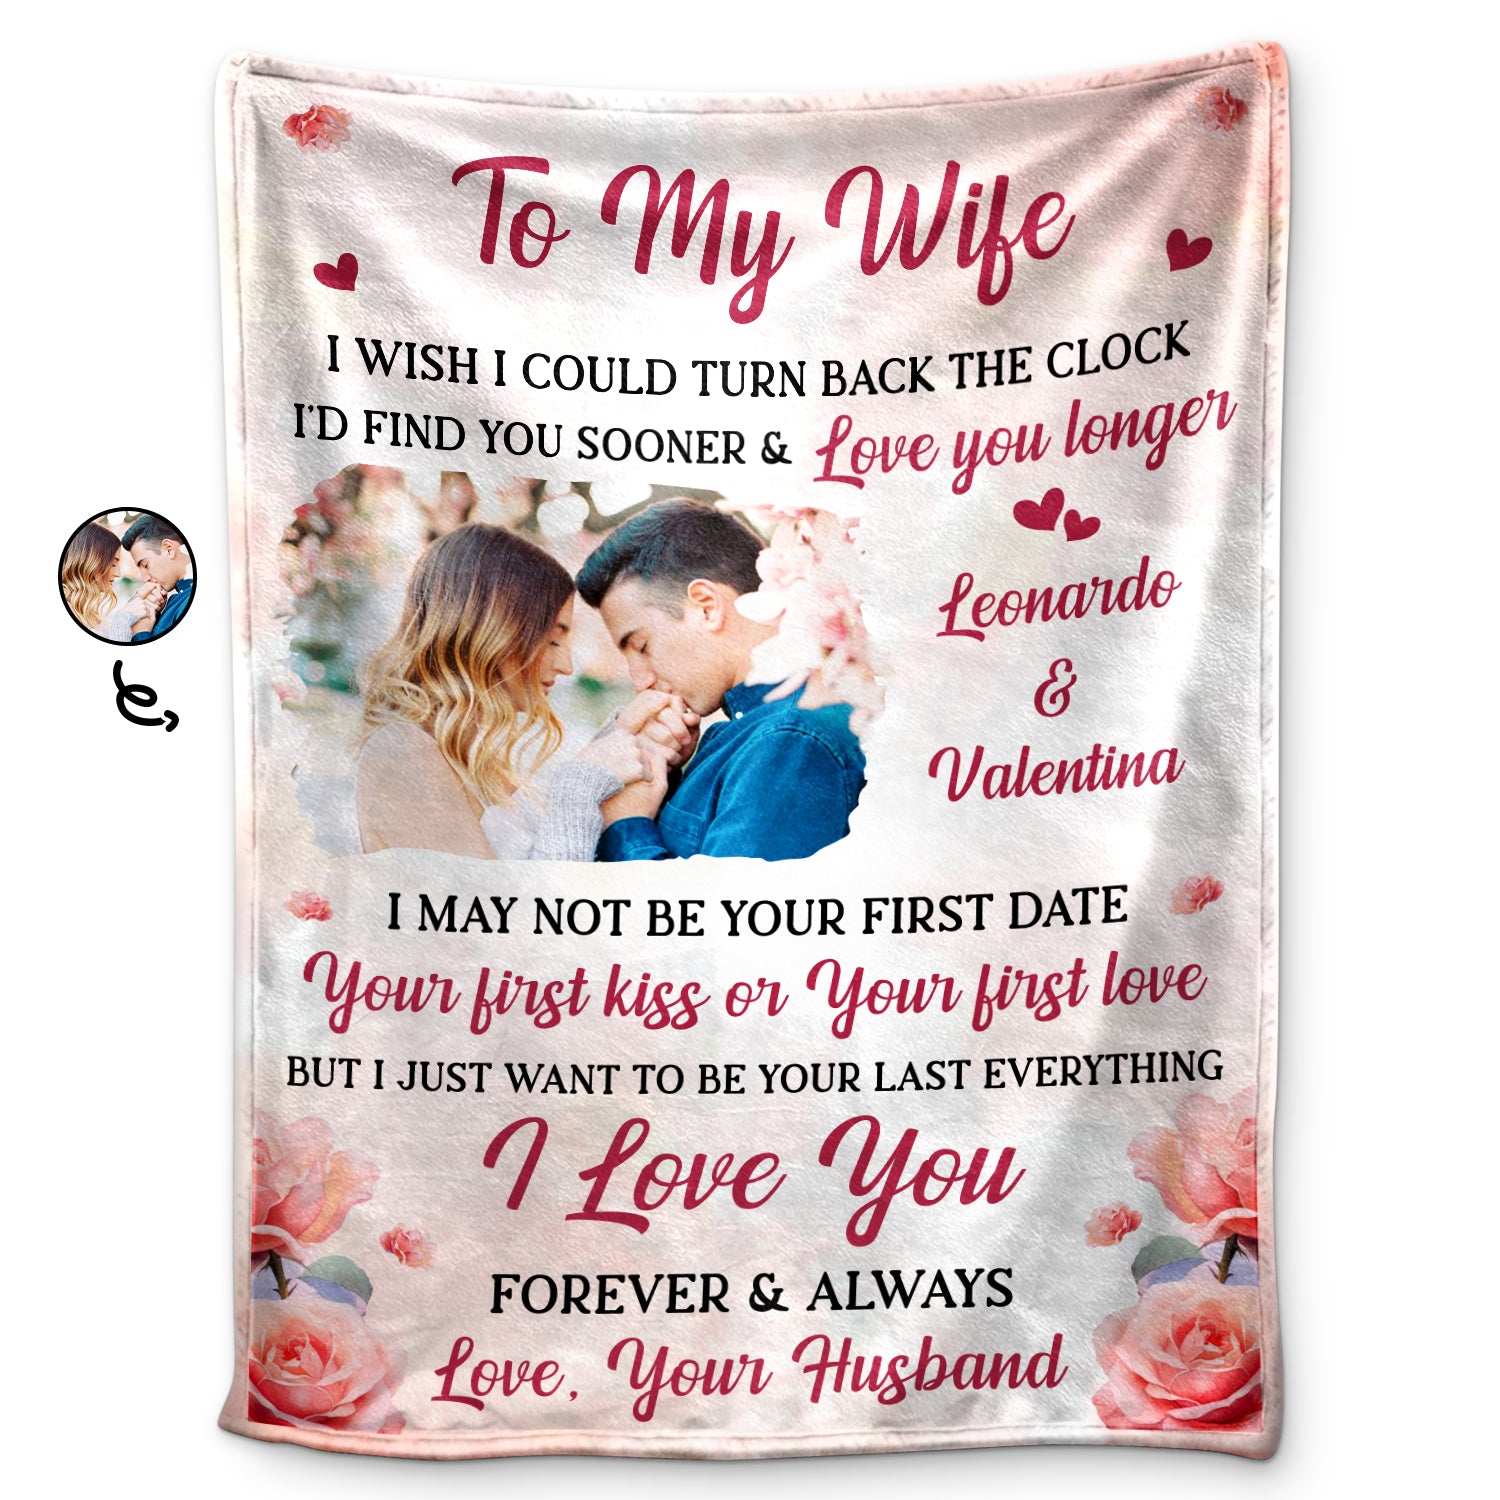 Custom Photo I Love You Forever And Always - Loving Gift For Couples, Wife, Husband - Personalized Fleece Blanket, Sherpa Blanket